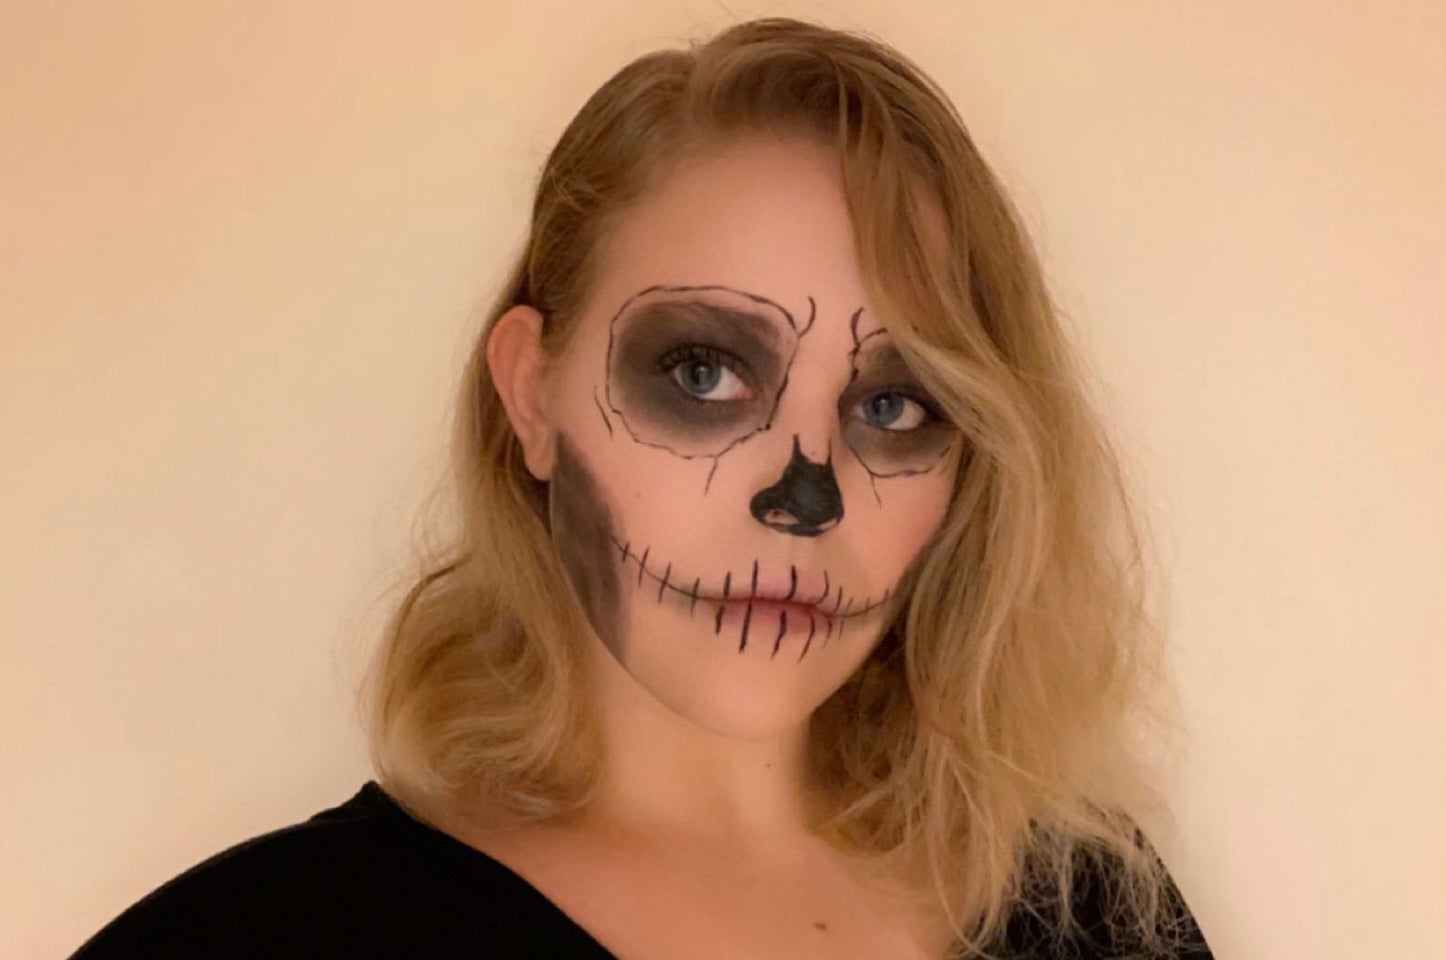 My costume as a skeleton